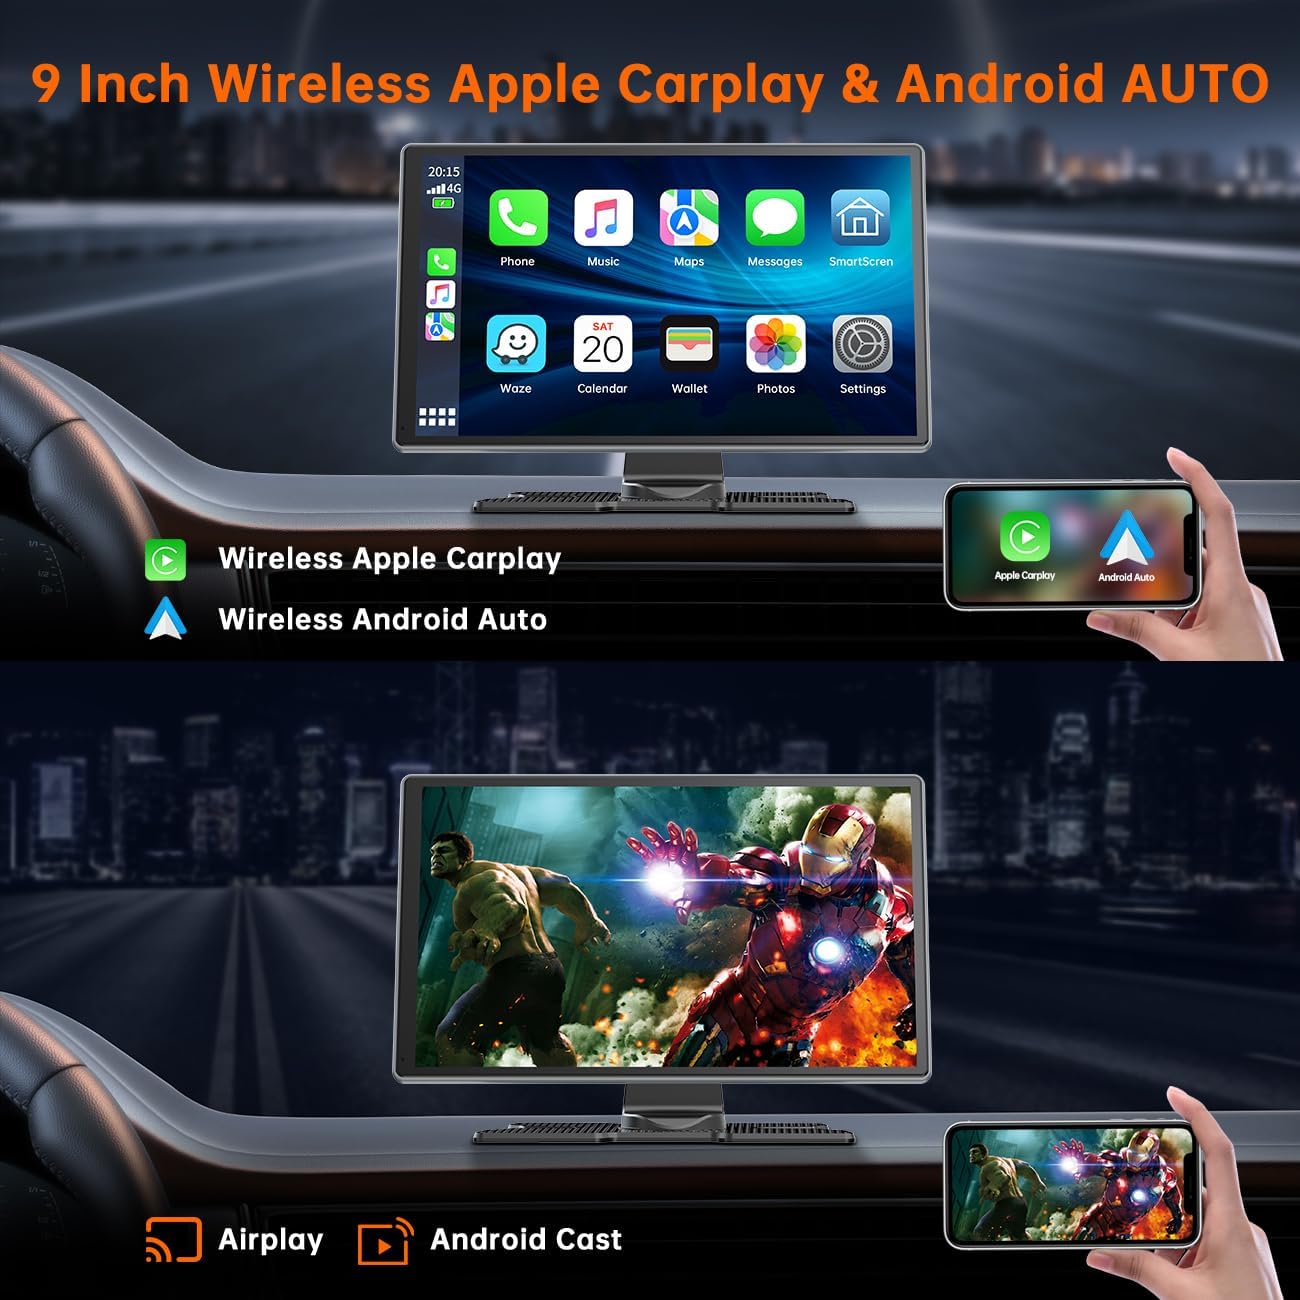 9 Inch Wireless Car Stereo with Apple Carplay, Android Auto,4K Dash Cam, 1080p Backup Camera